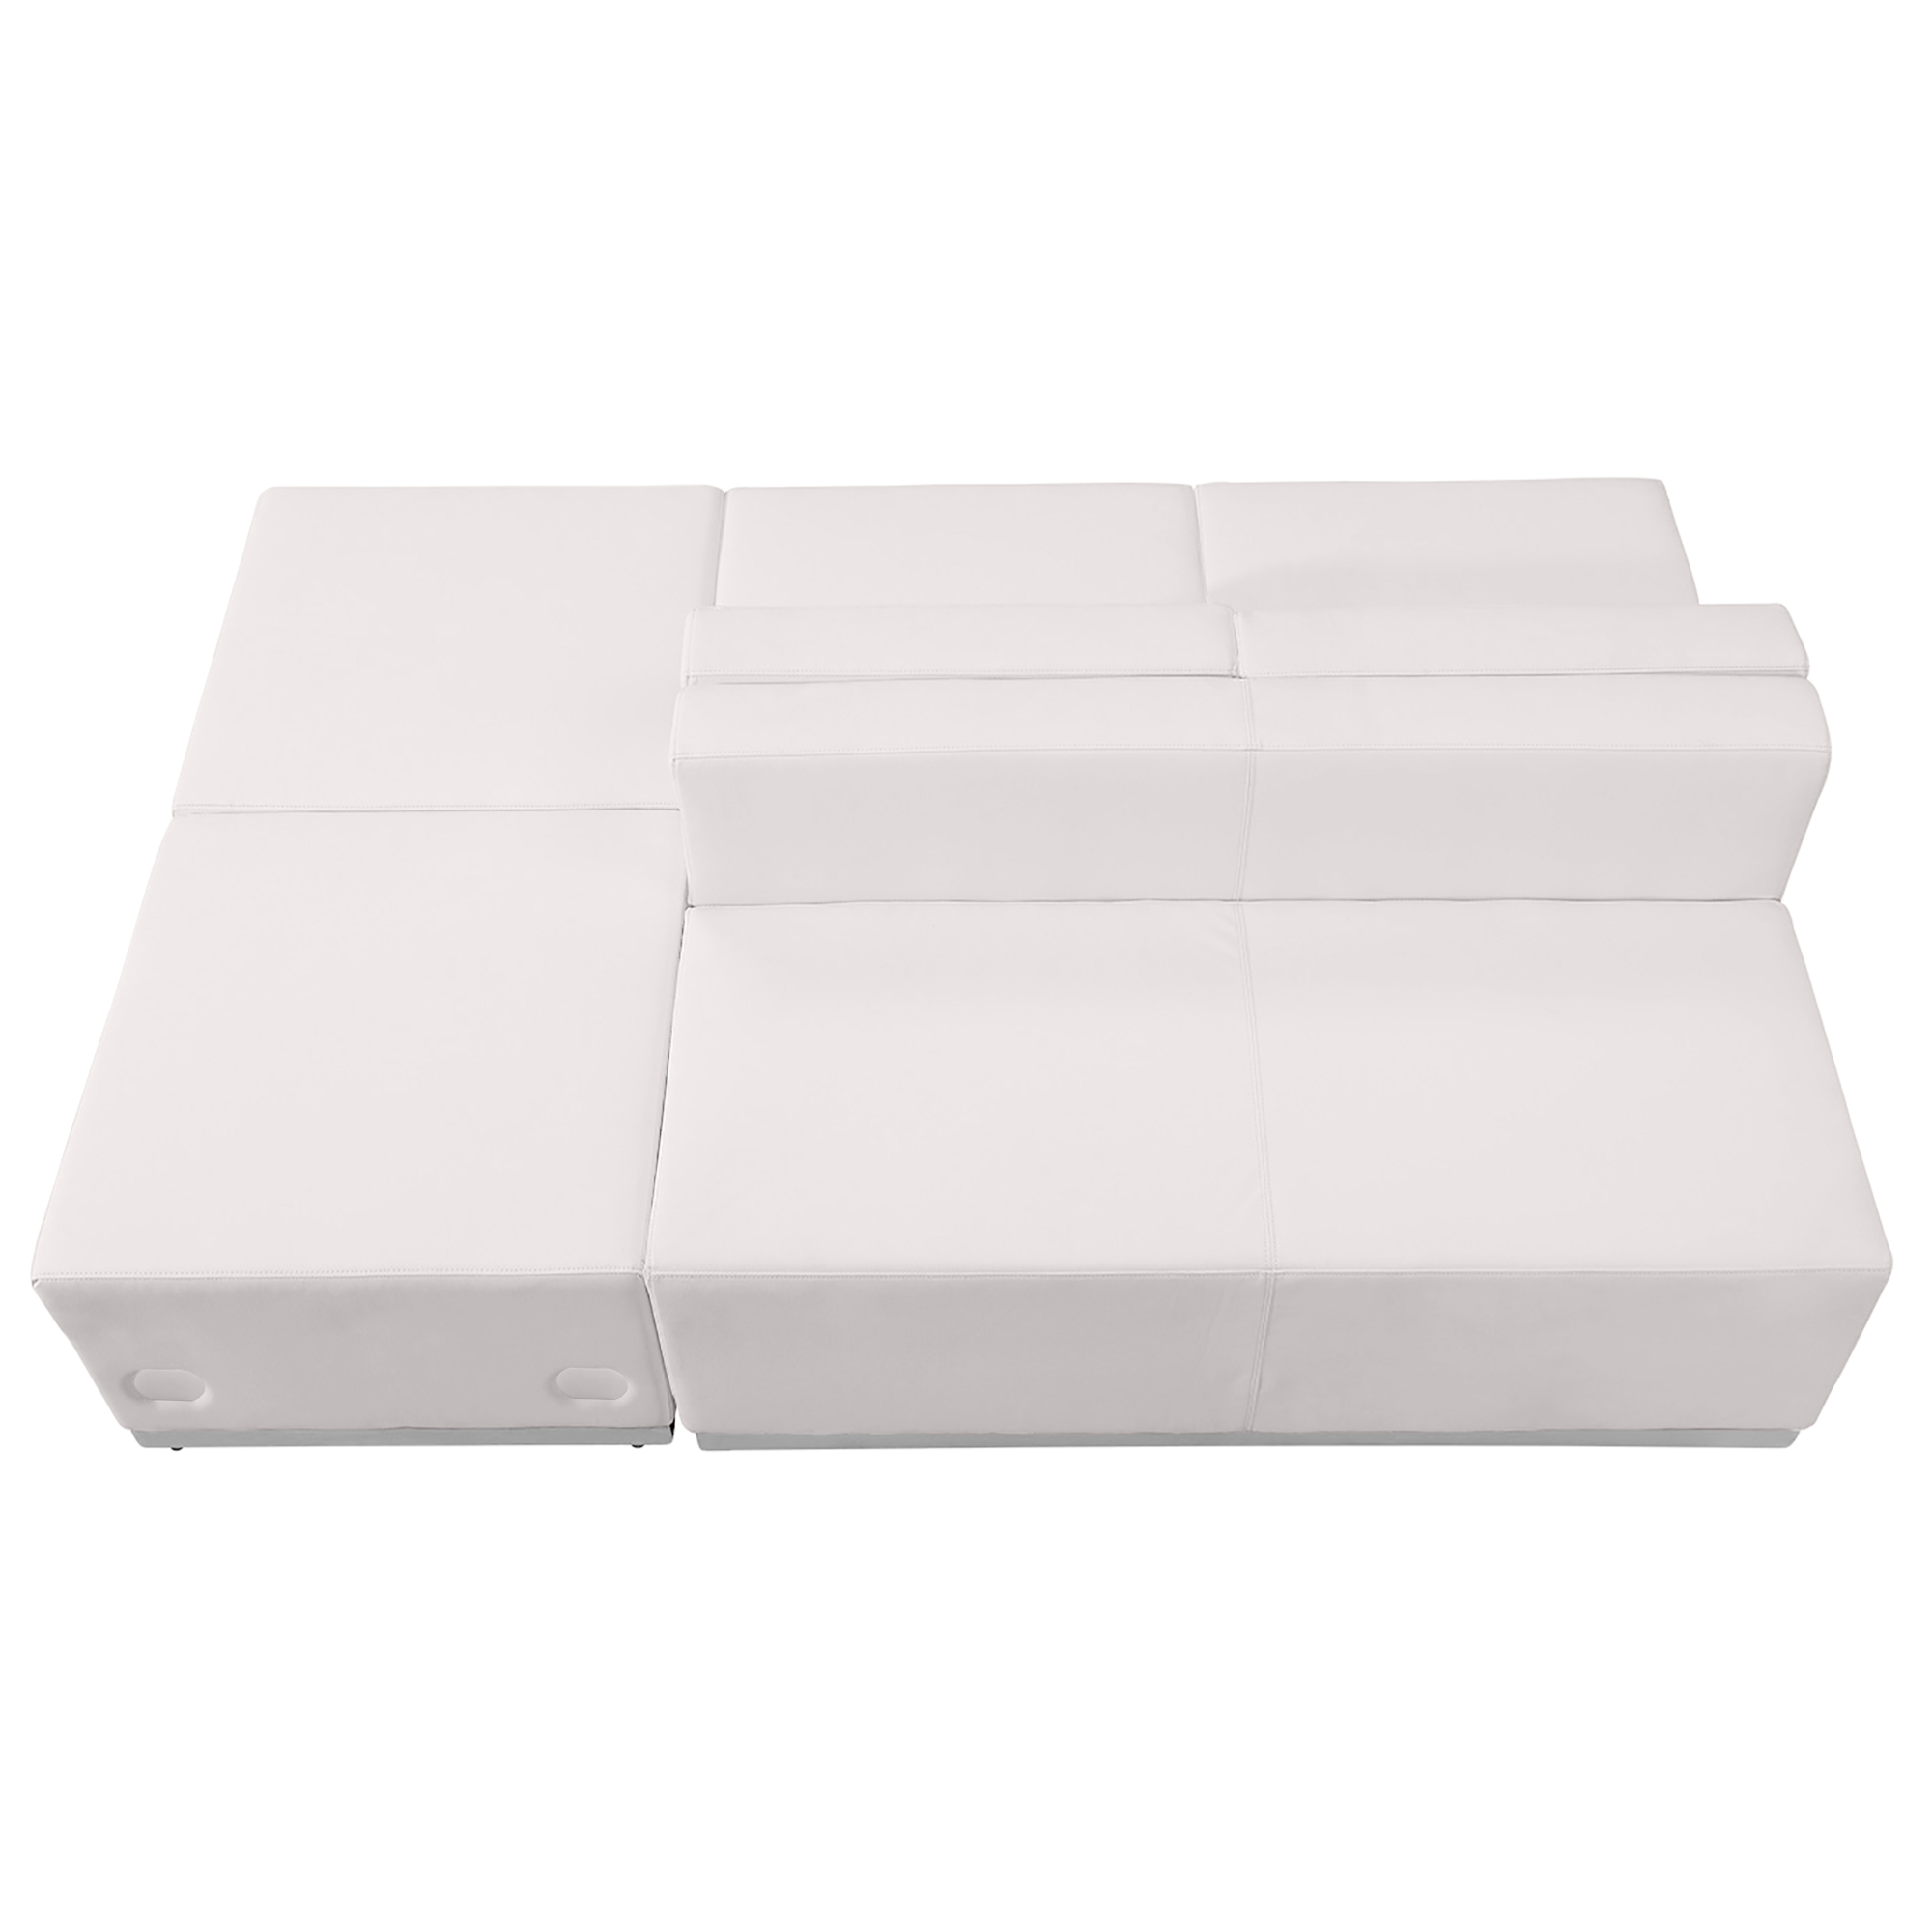 Flash Furniture, 4 PC White LeatherSoft Reception Configuration, Primary Color White, Included (qty.) 4, Model ZB803880SWH